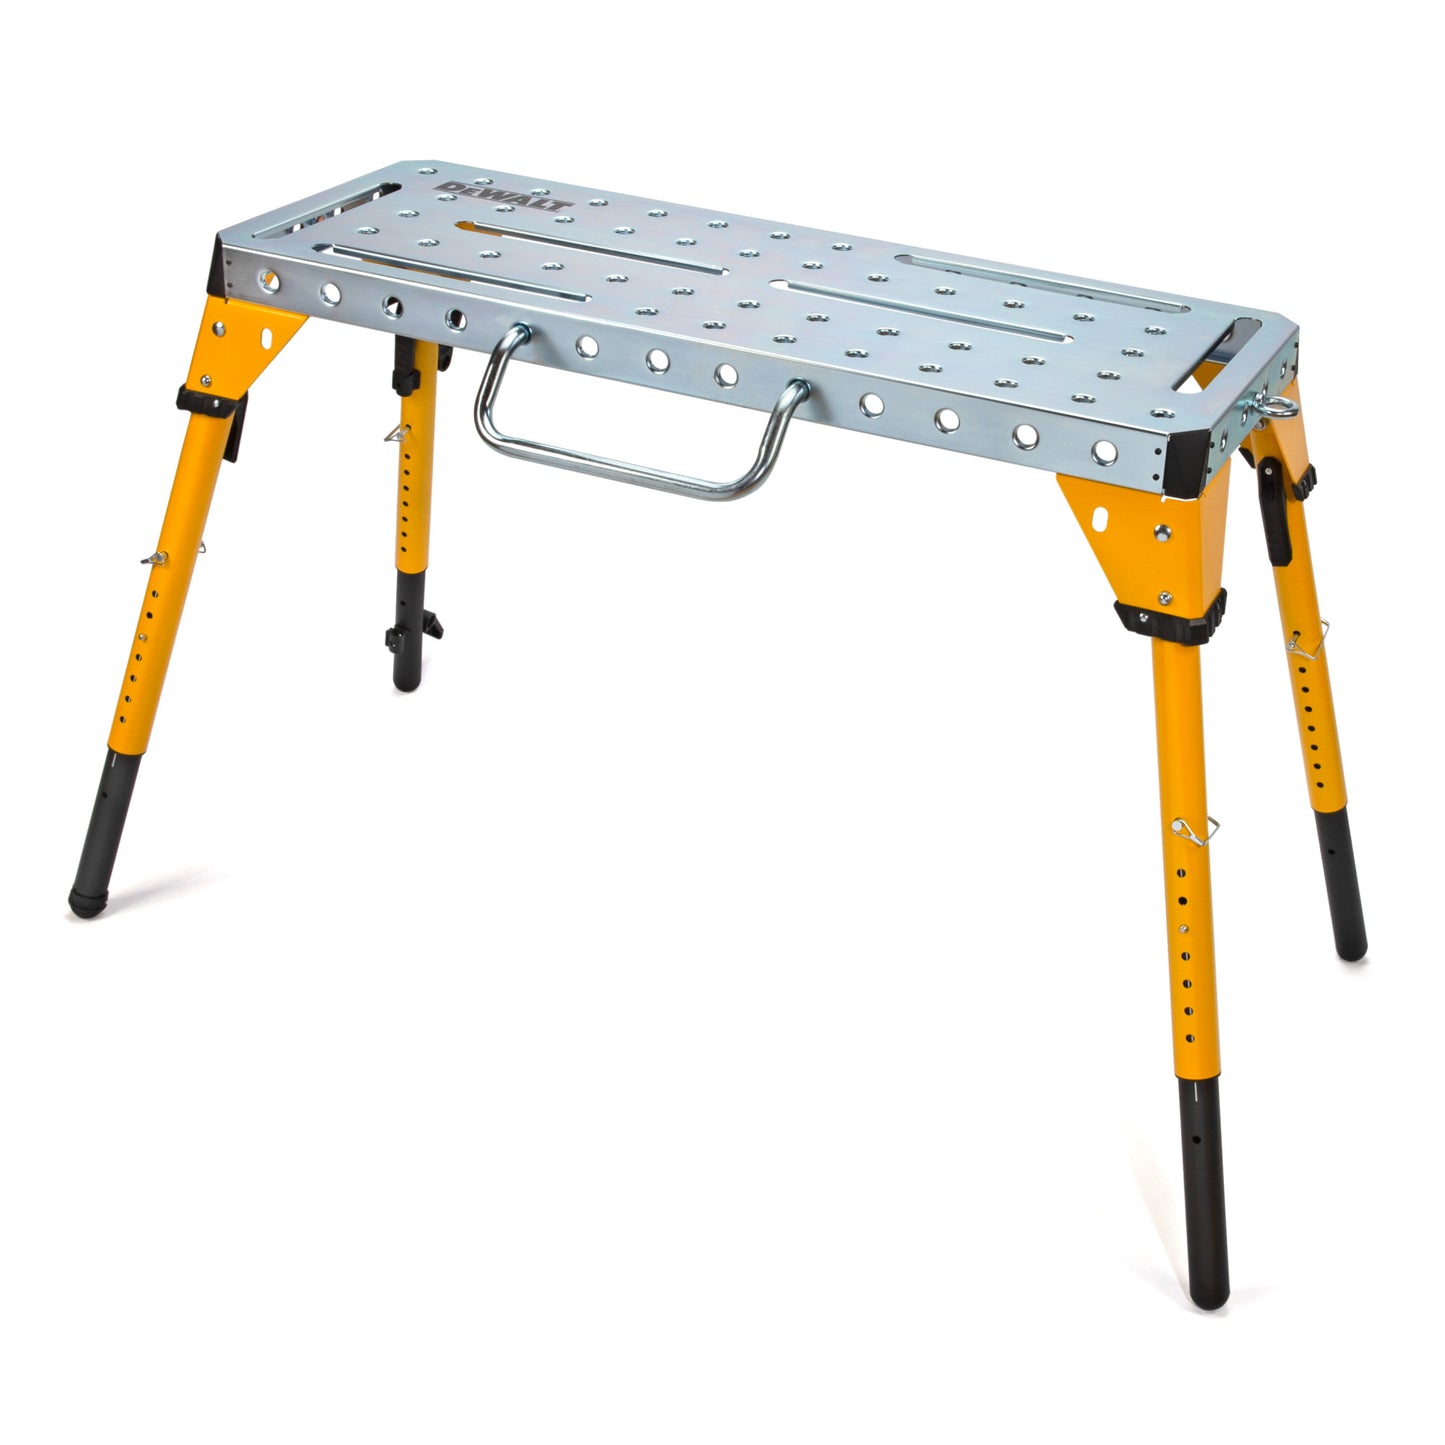 Adjustable Welding Table and Work Bench